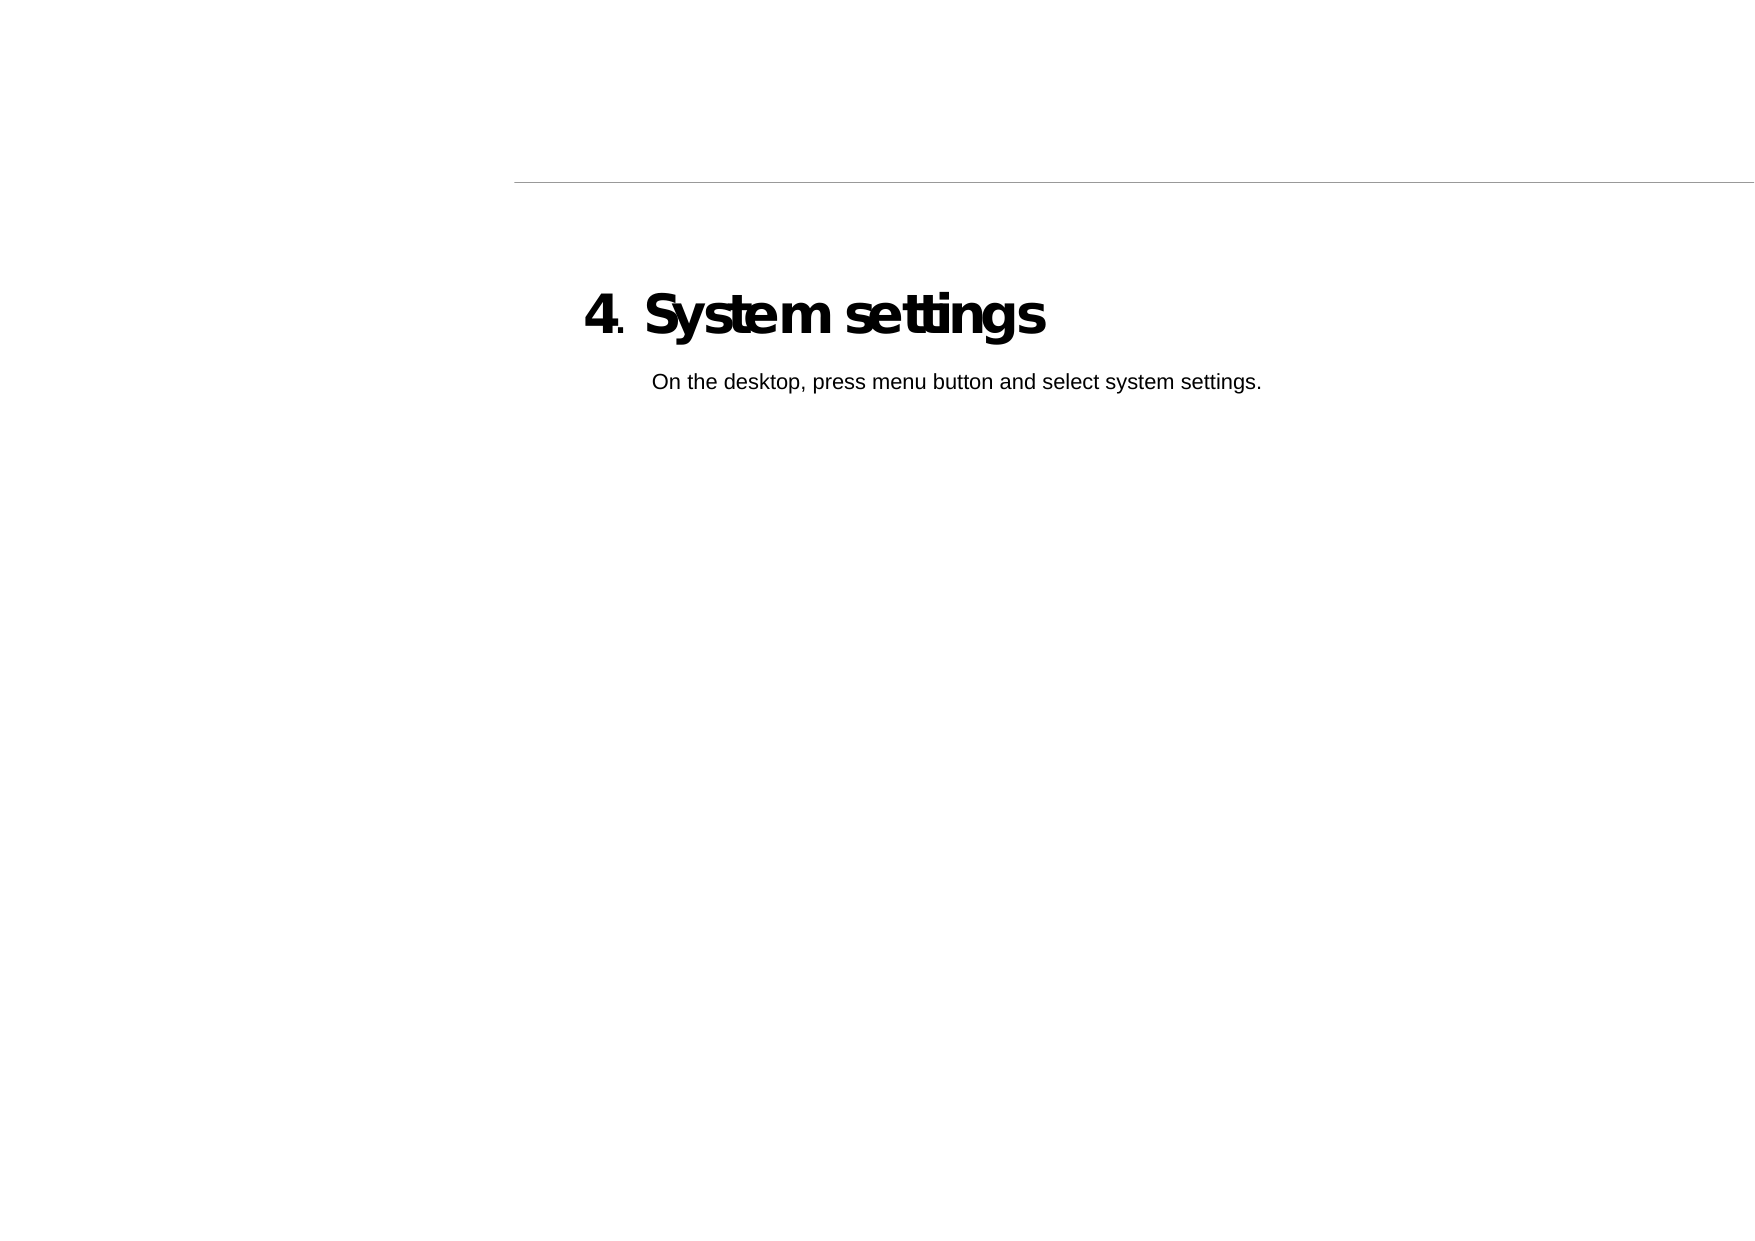   4. System settings  On the desktop, press menu button and select system settings. 